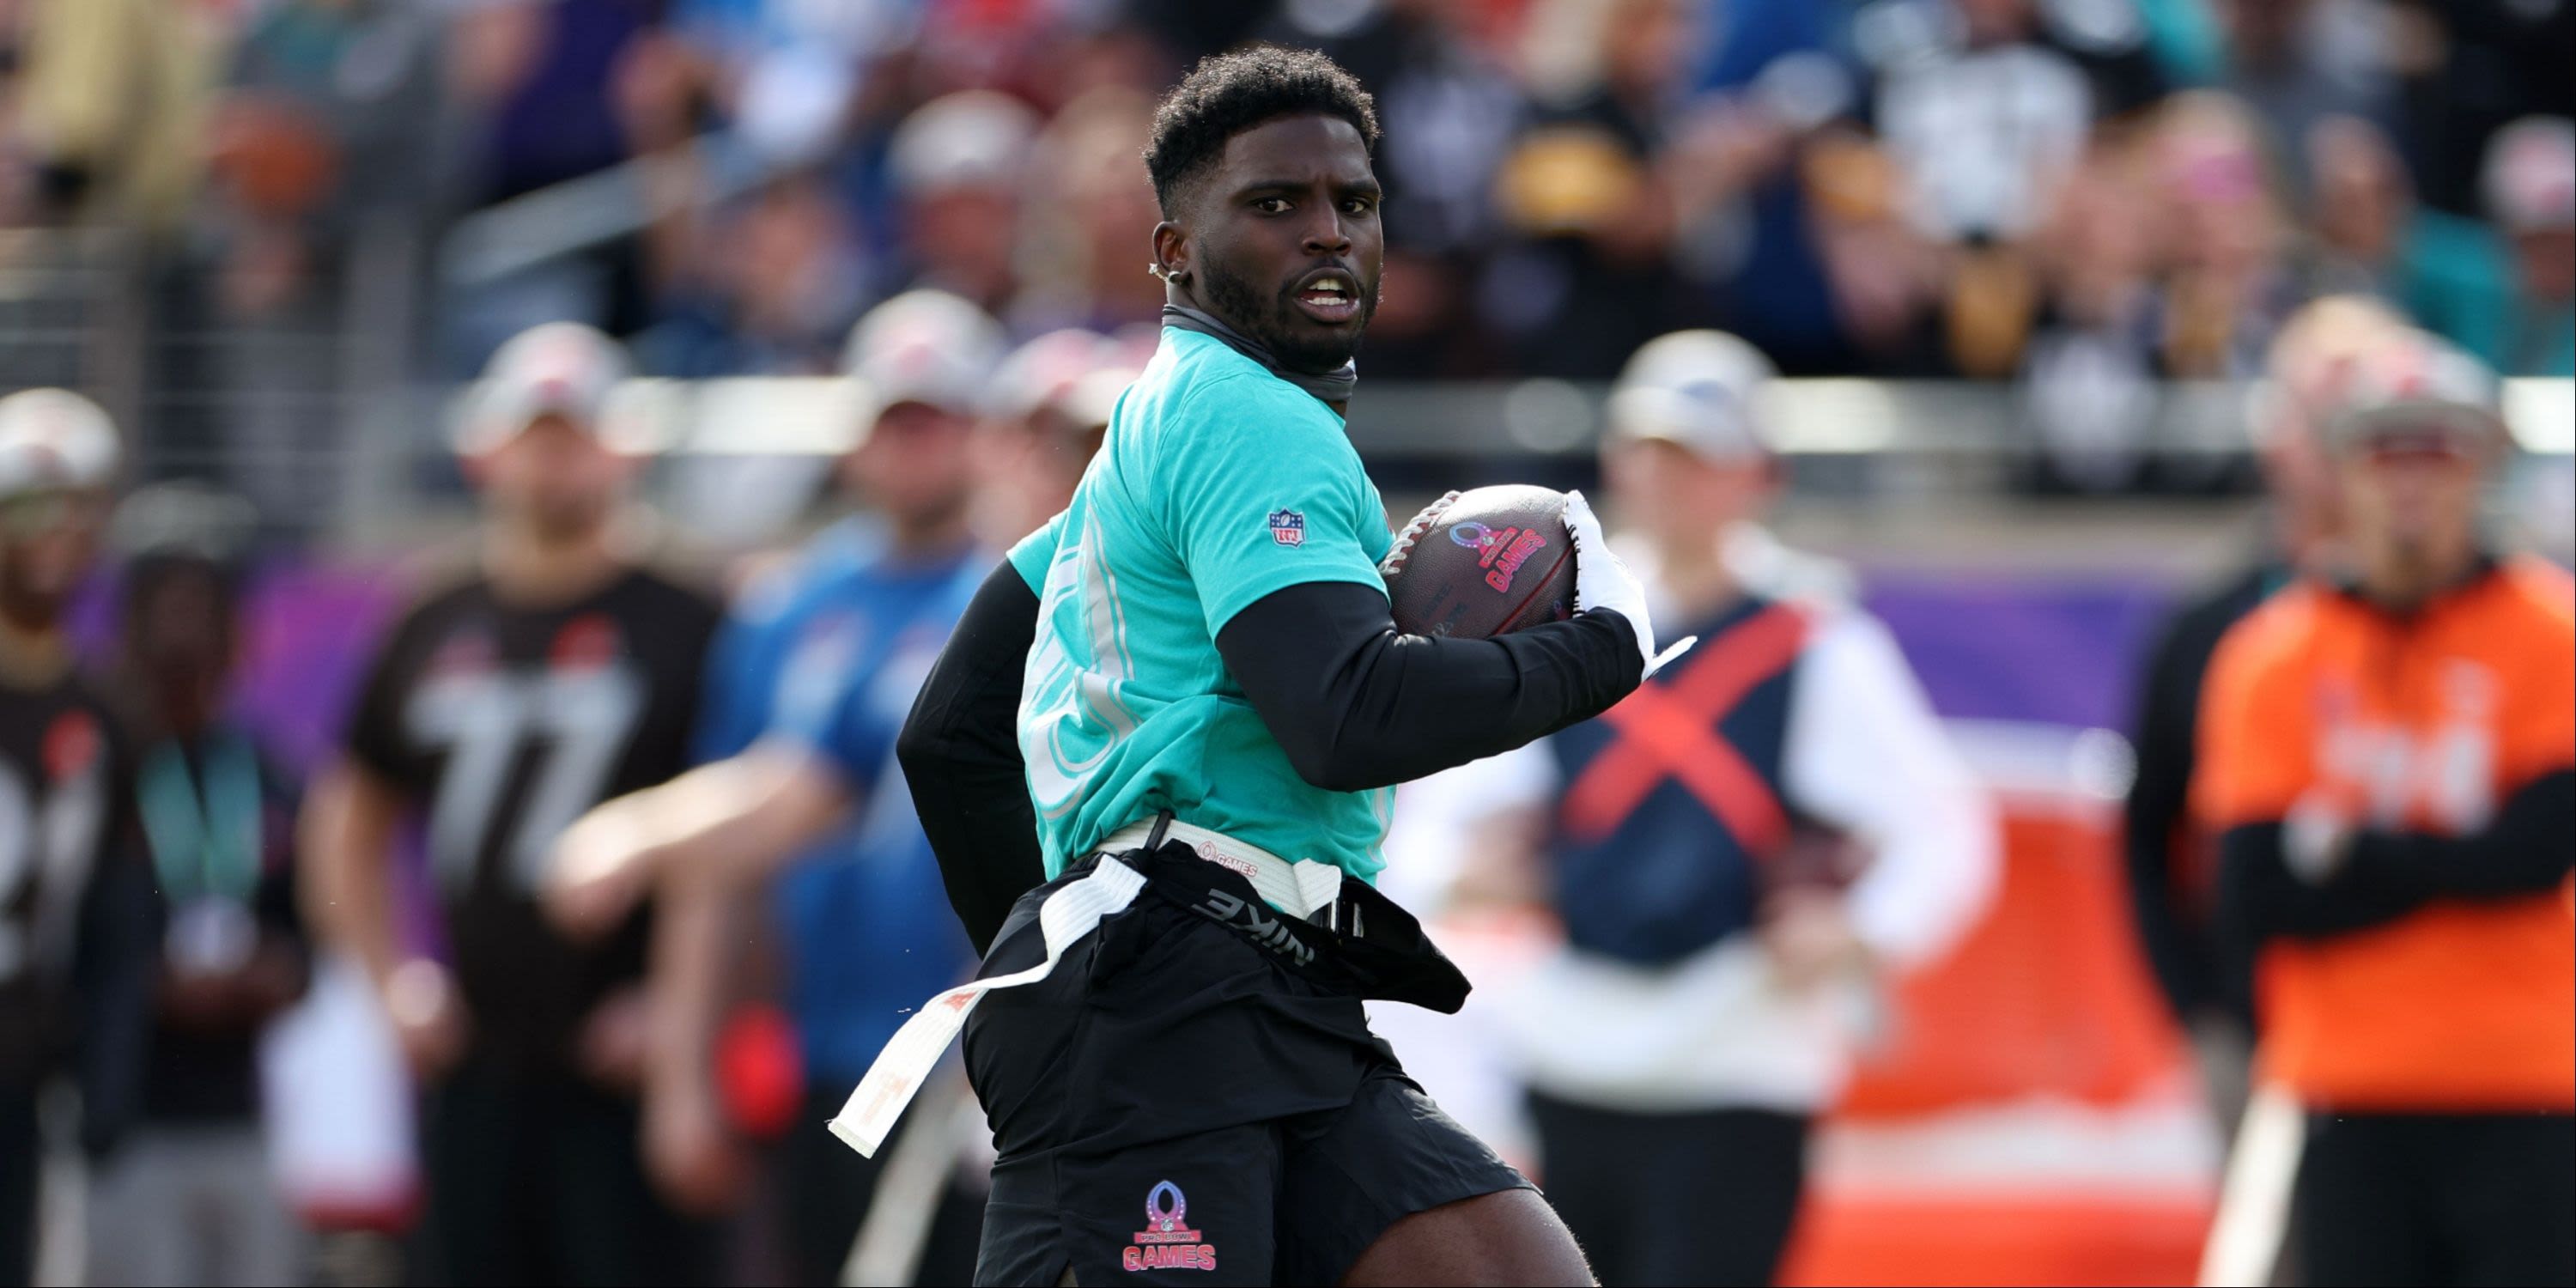 WATCH: Dolphins Tyreek Hill Gets Juked At Youth Camp